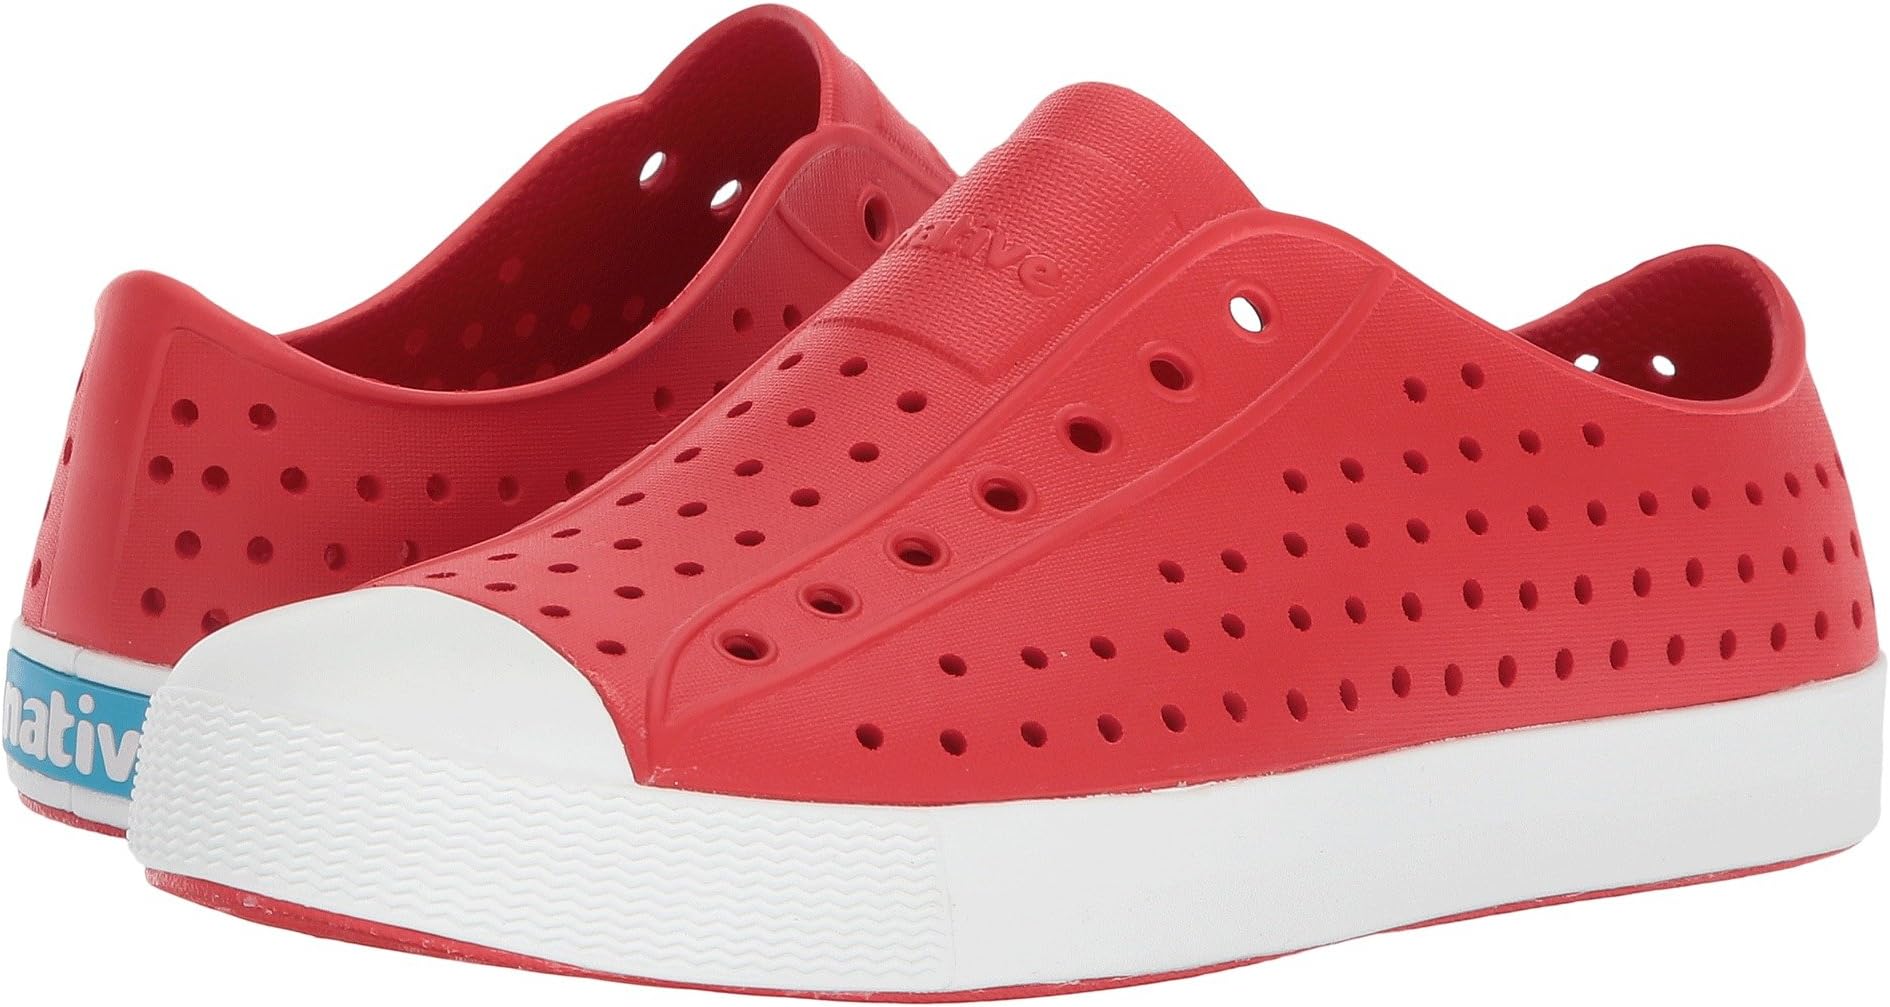 Кроссовки Jefferson Slip-on Sneakers Native Shoes Kids, цвет Torch Red/Shell White кроссовки native shoes kids jefferson slip on sneakers